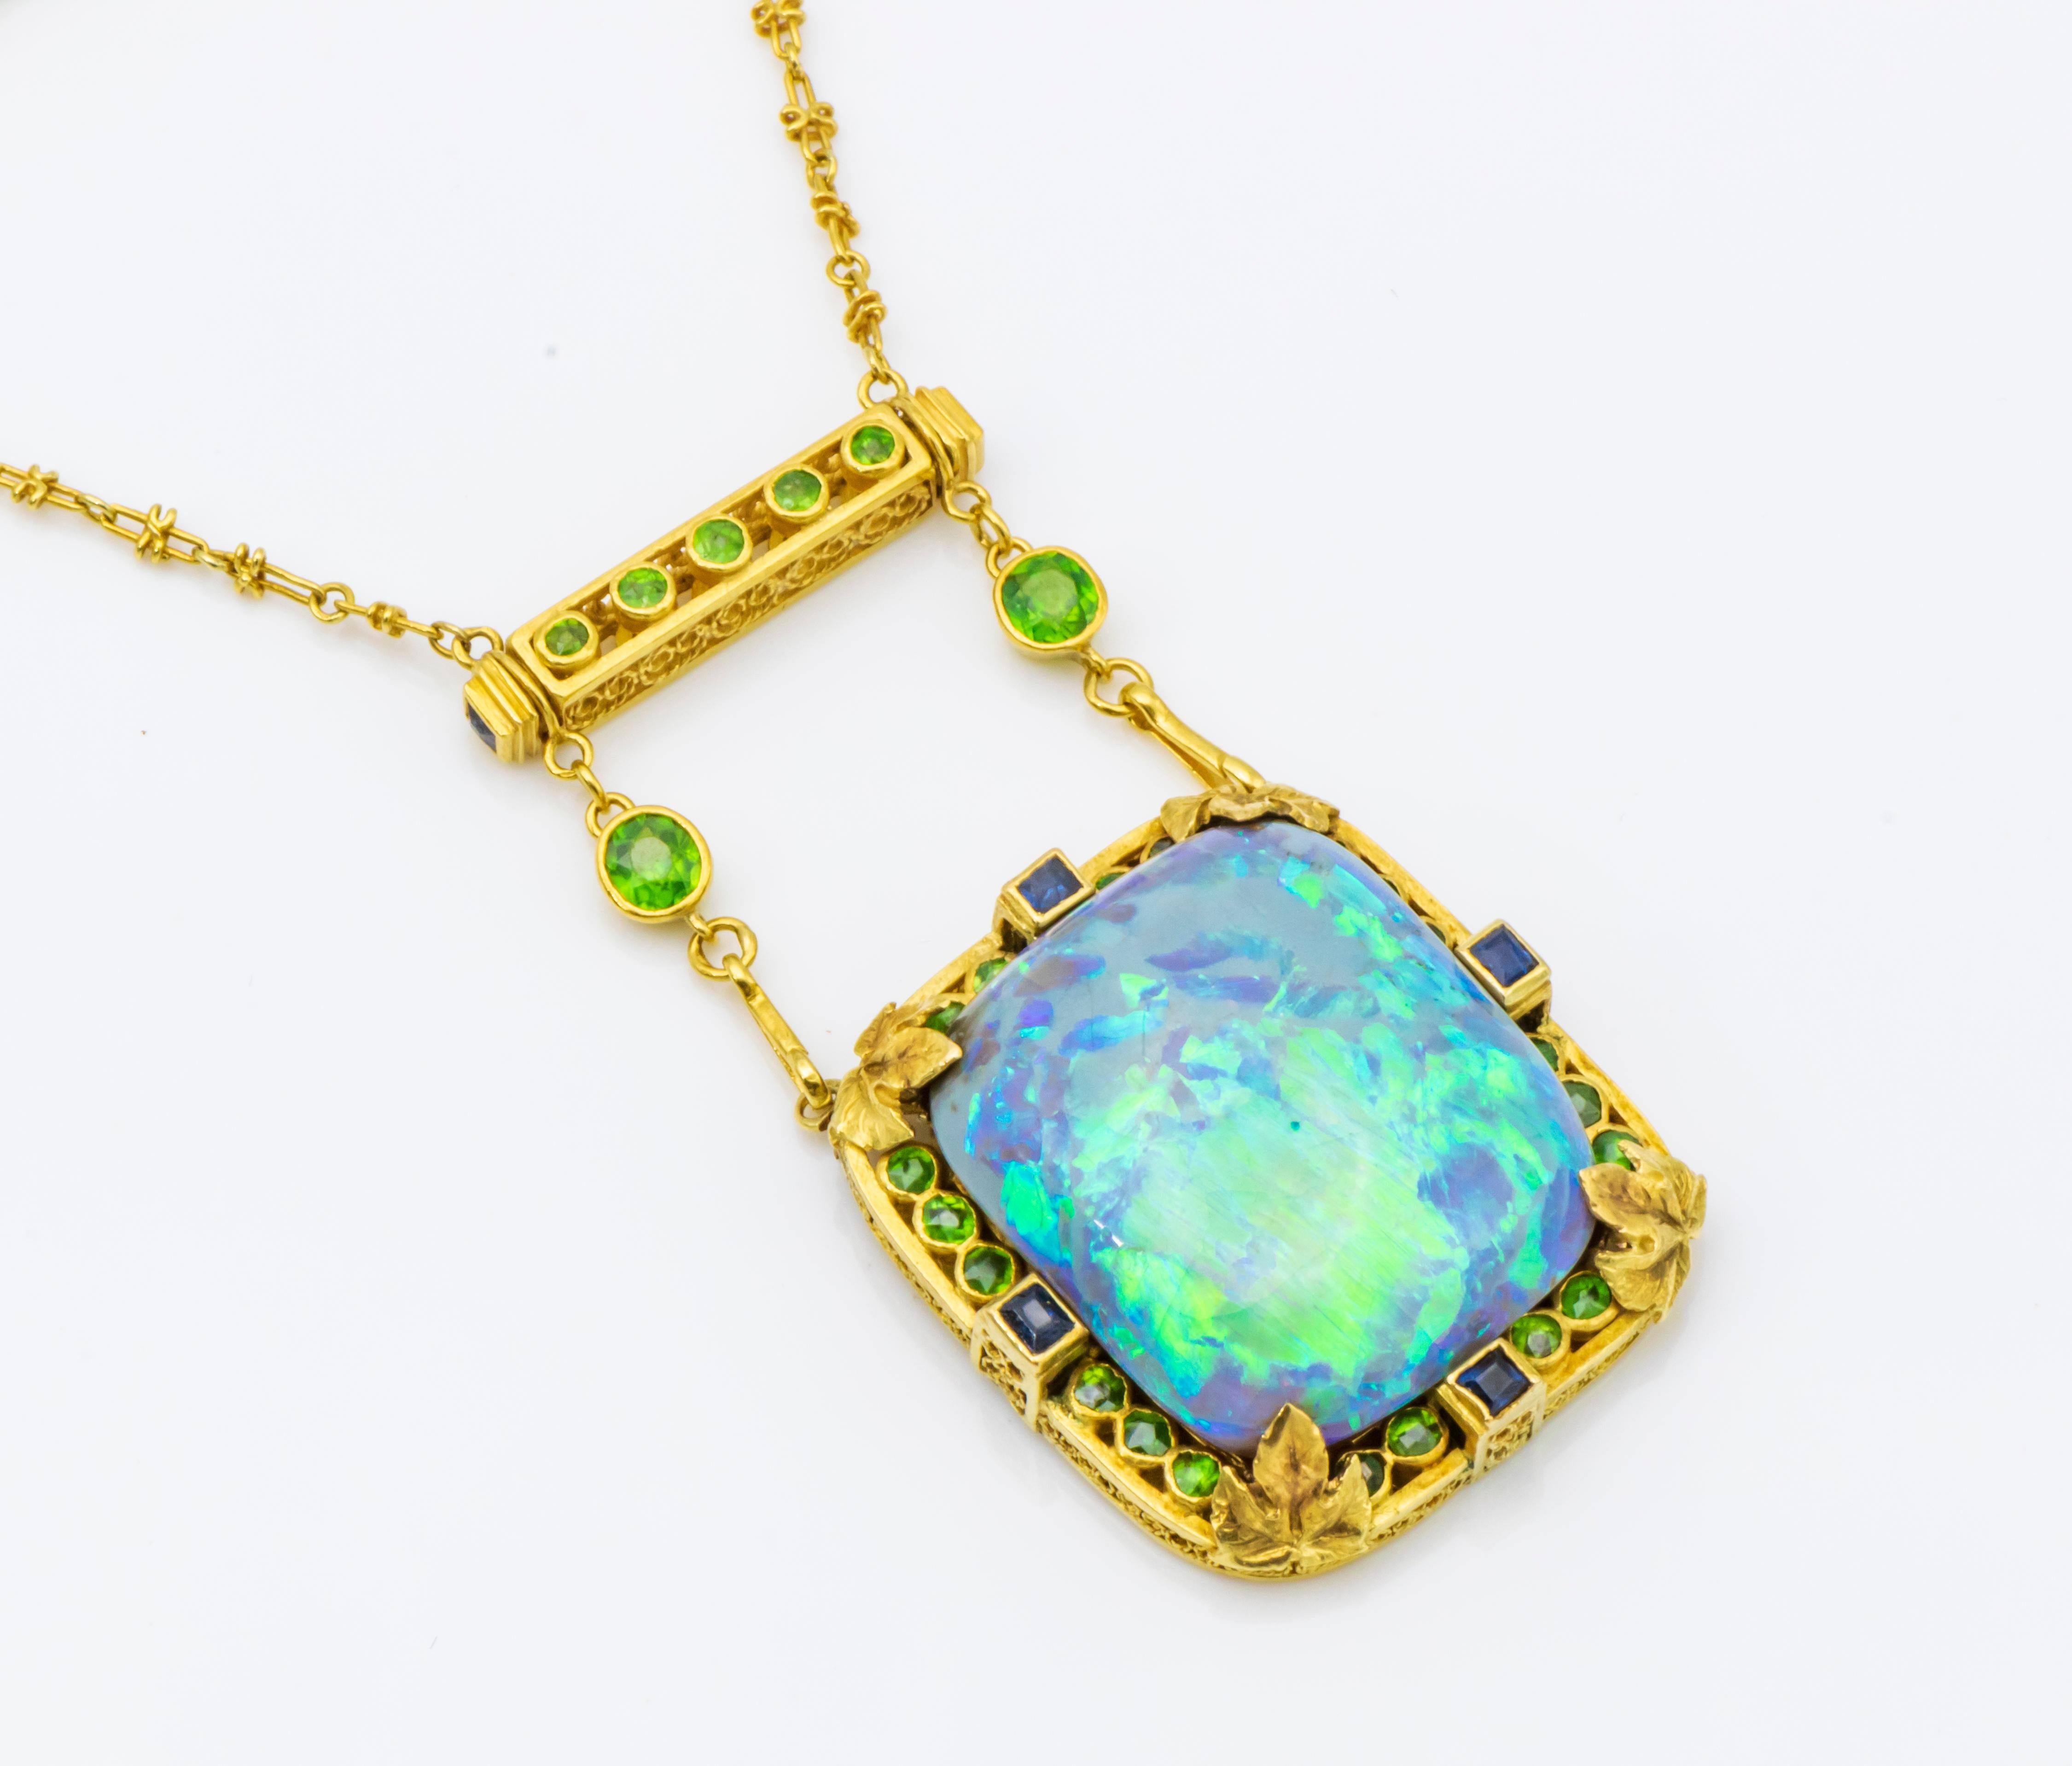 A black opal demantoid garnet and sapphire pendant brooch set with rectangular cushion-cut black opal tablet surrounded by bezel set demantoid garnets and sapphires accented by grape leaves, suspending from a removable delicate link chain accented